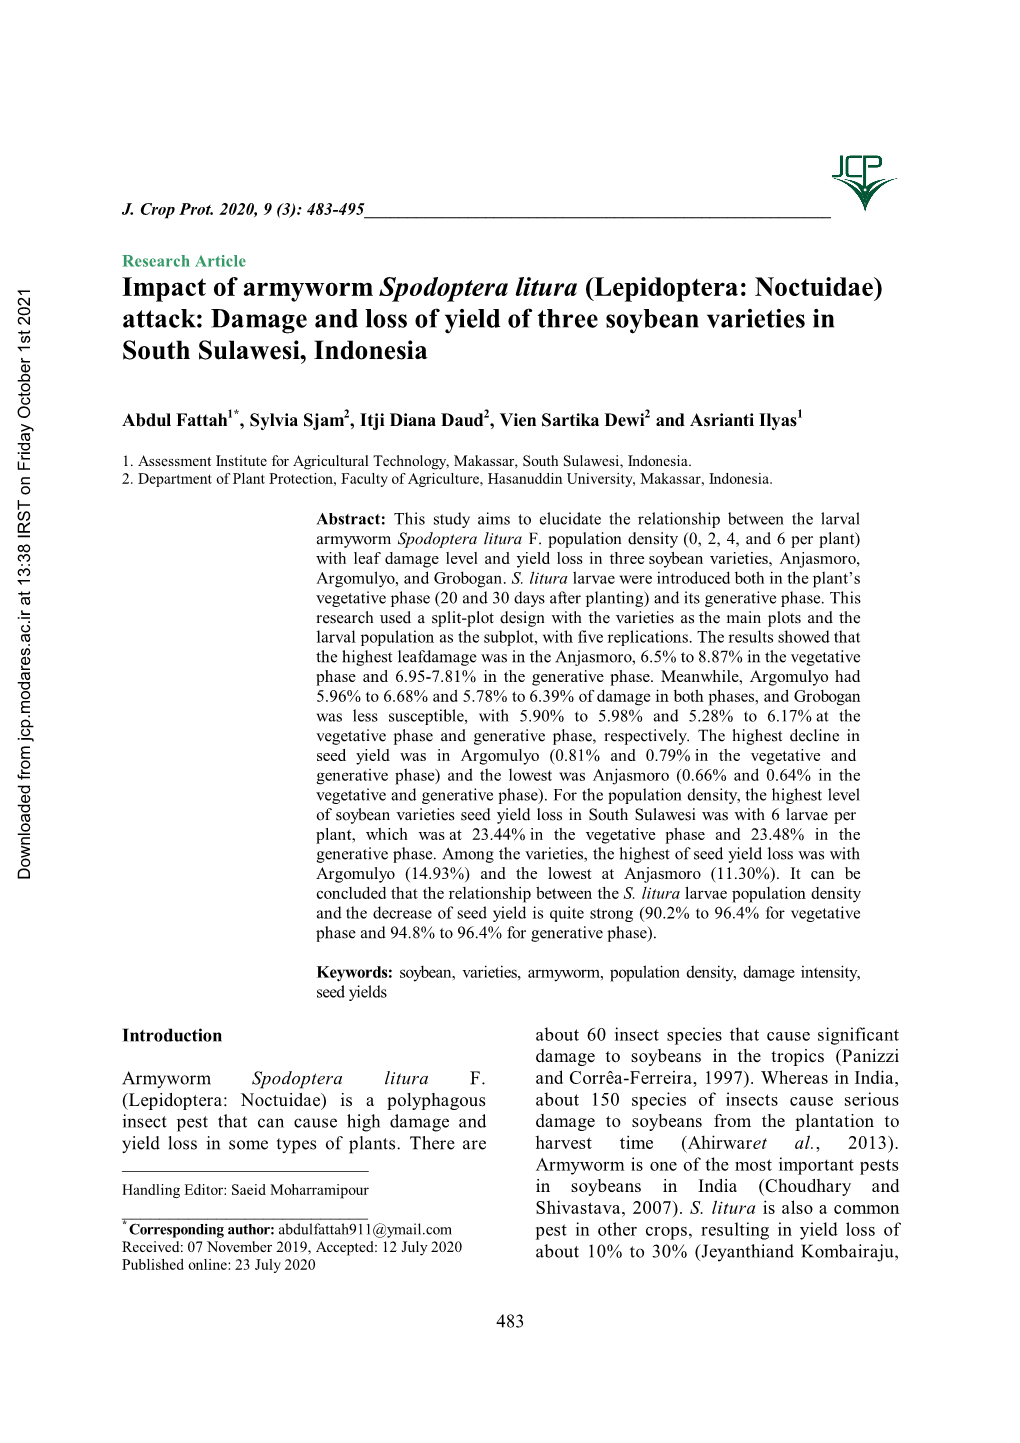 Impact of Armyworm Spodoptera Litura (Lepidoptera: Noctuidae) Attack: Damage and Loss of Yield of Three Soybean Varieties in South Sulawesi, Indonesia